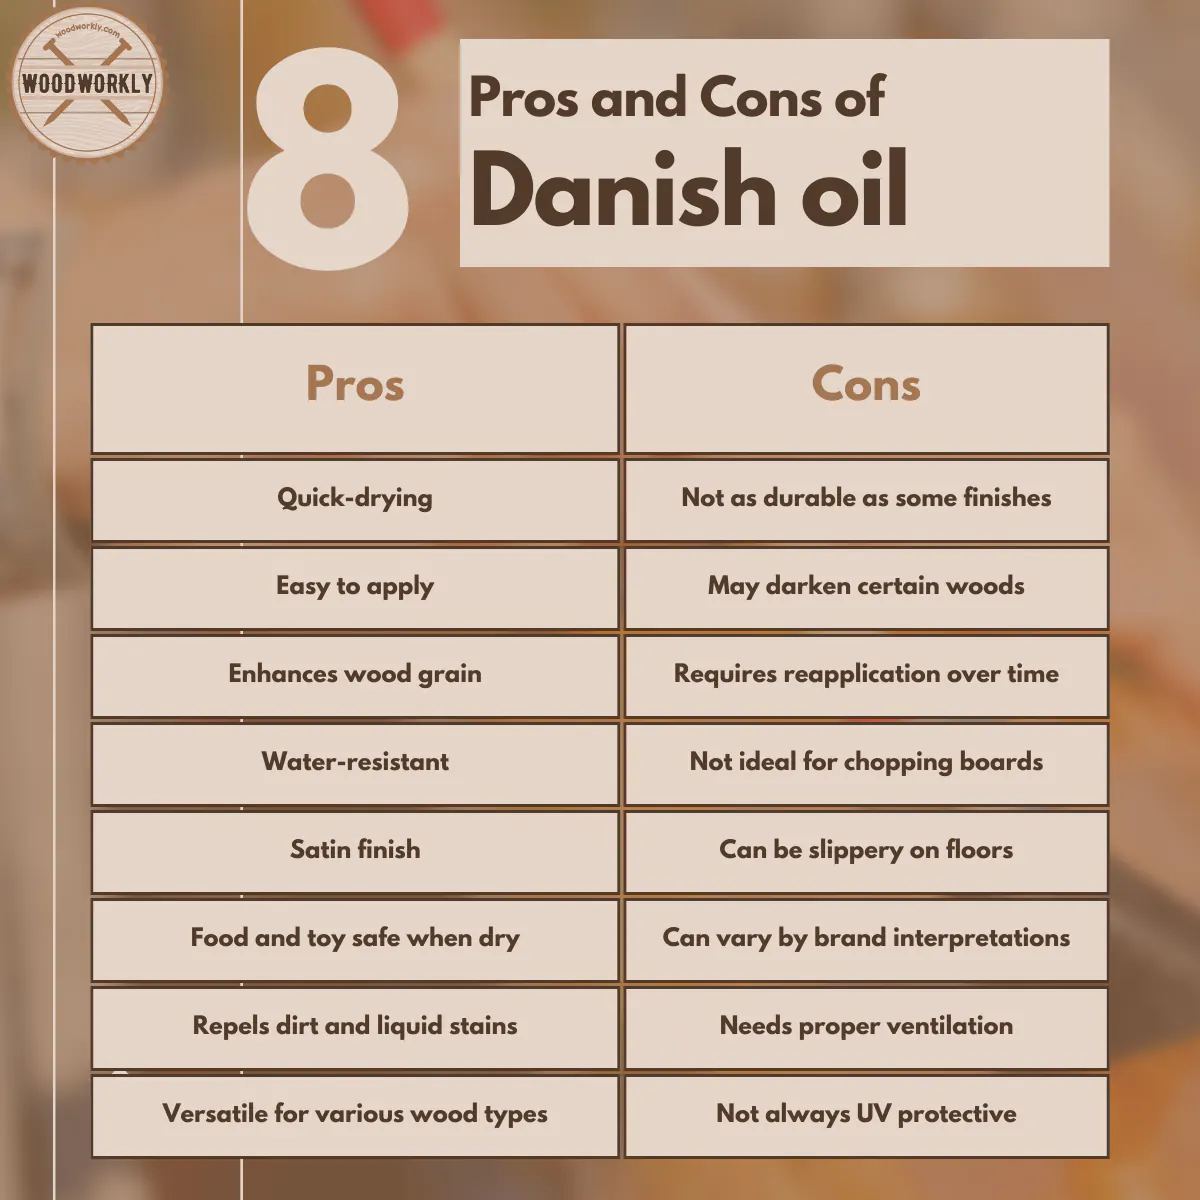 Pros and cons of Danish oil